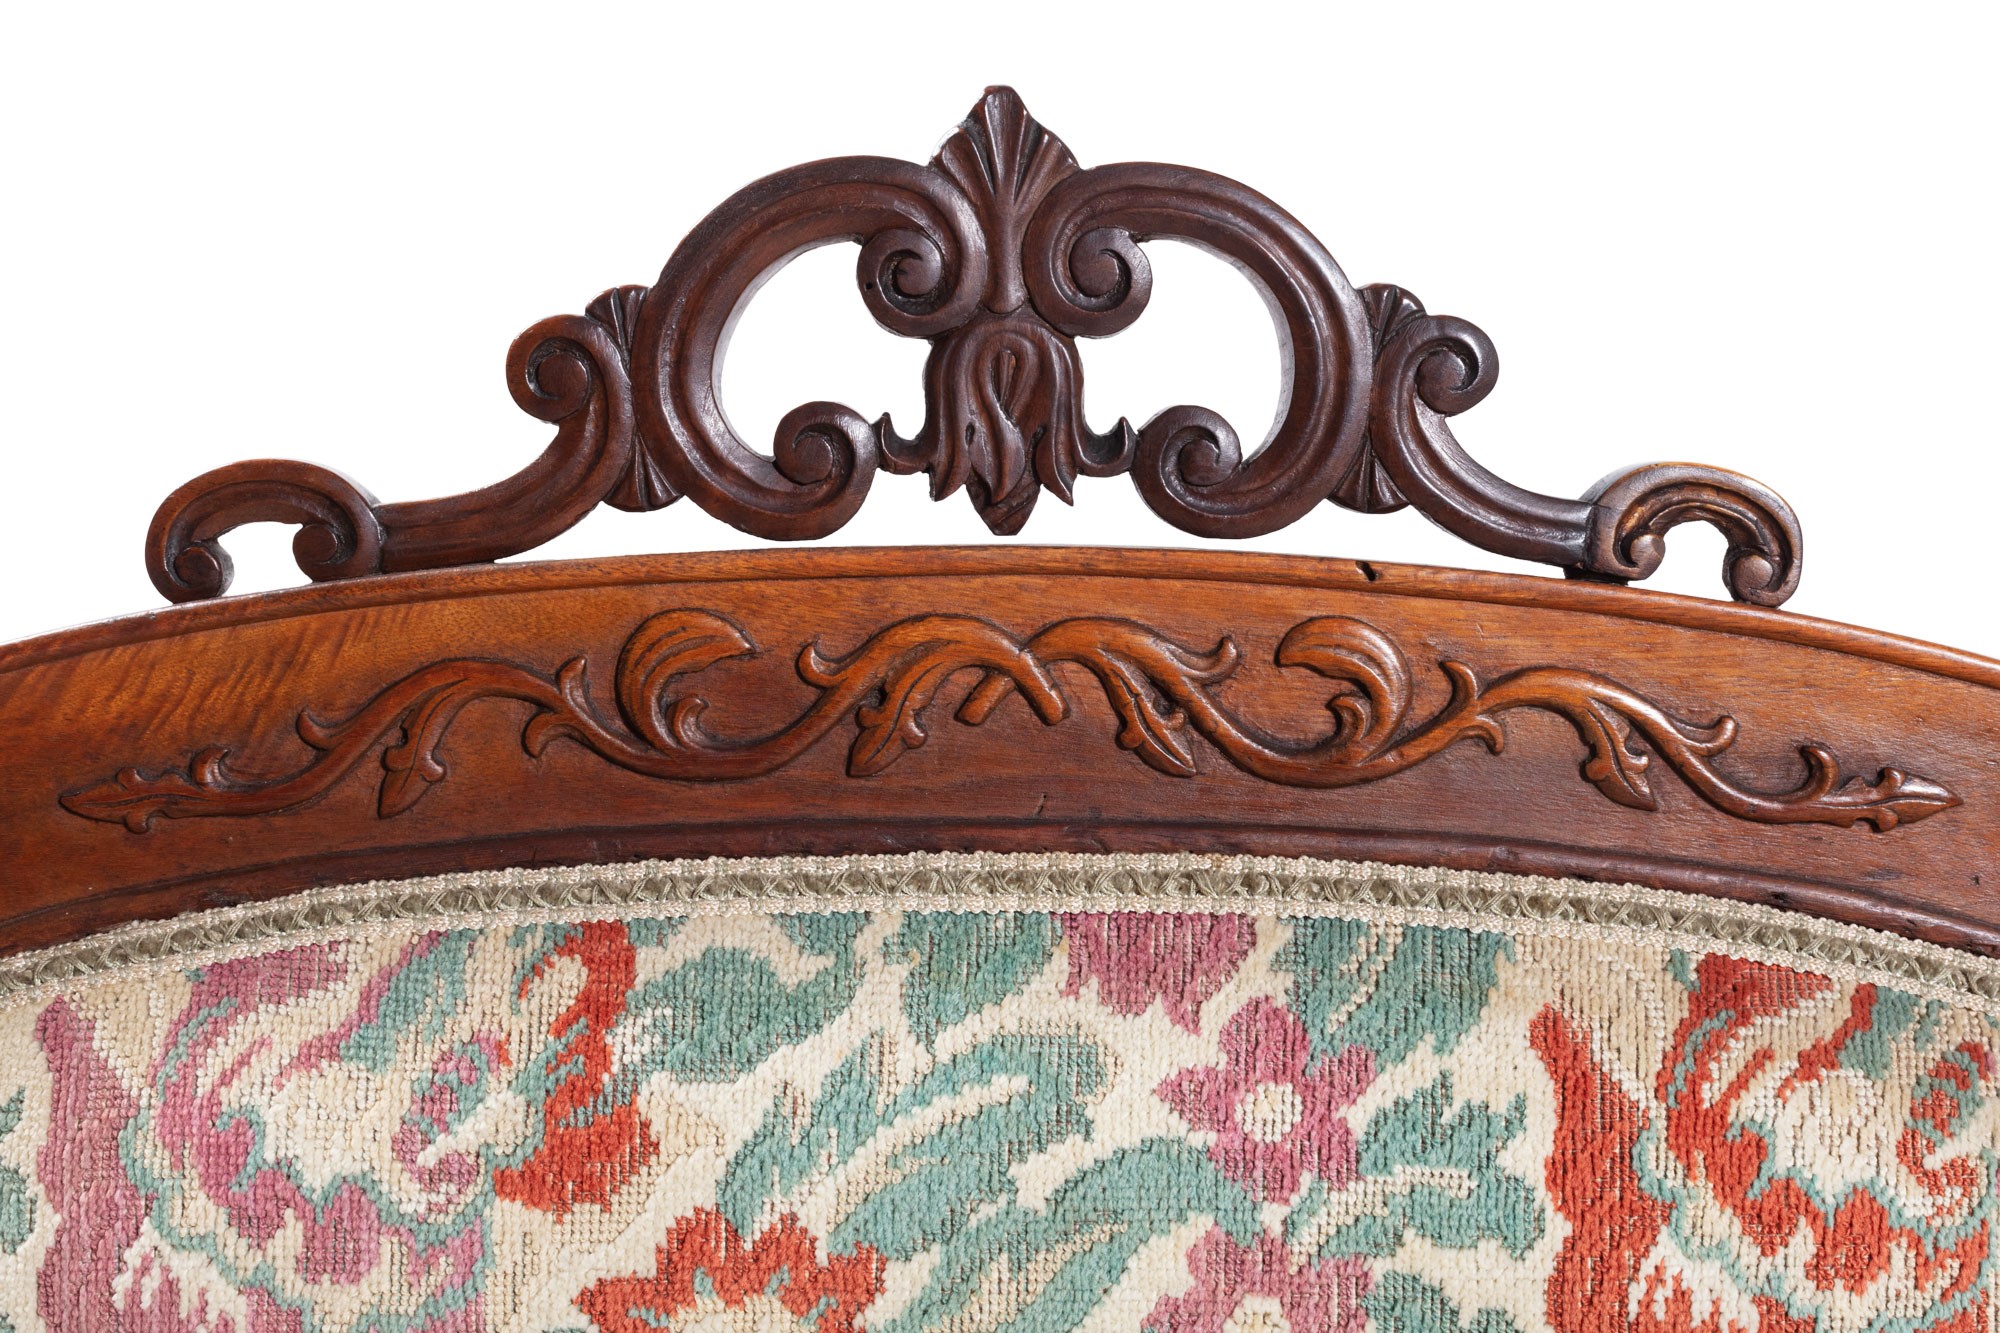 Walnut wood sofa manifacture ligure, mid 19th century, shaped armrests and back, curly feet, - Image 8 of 12